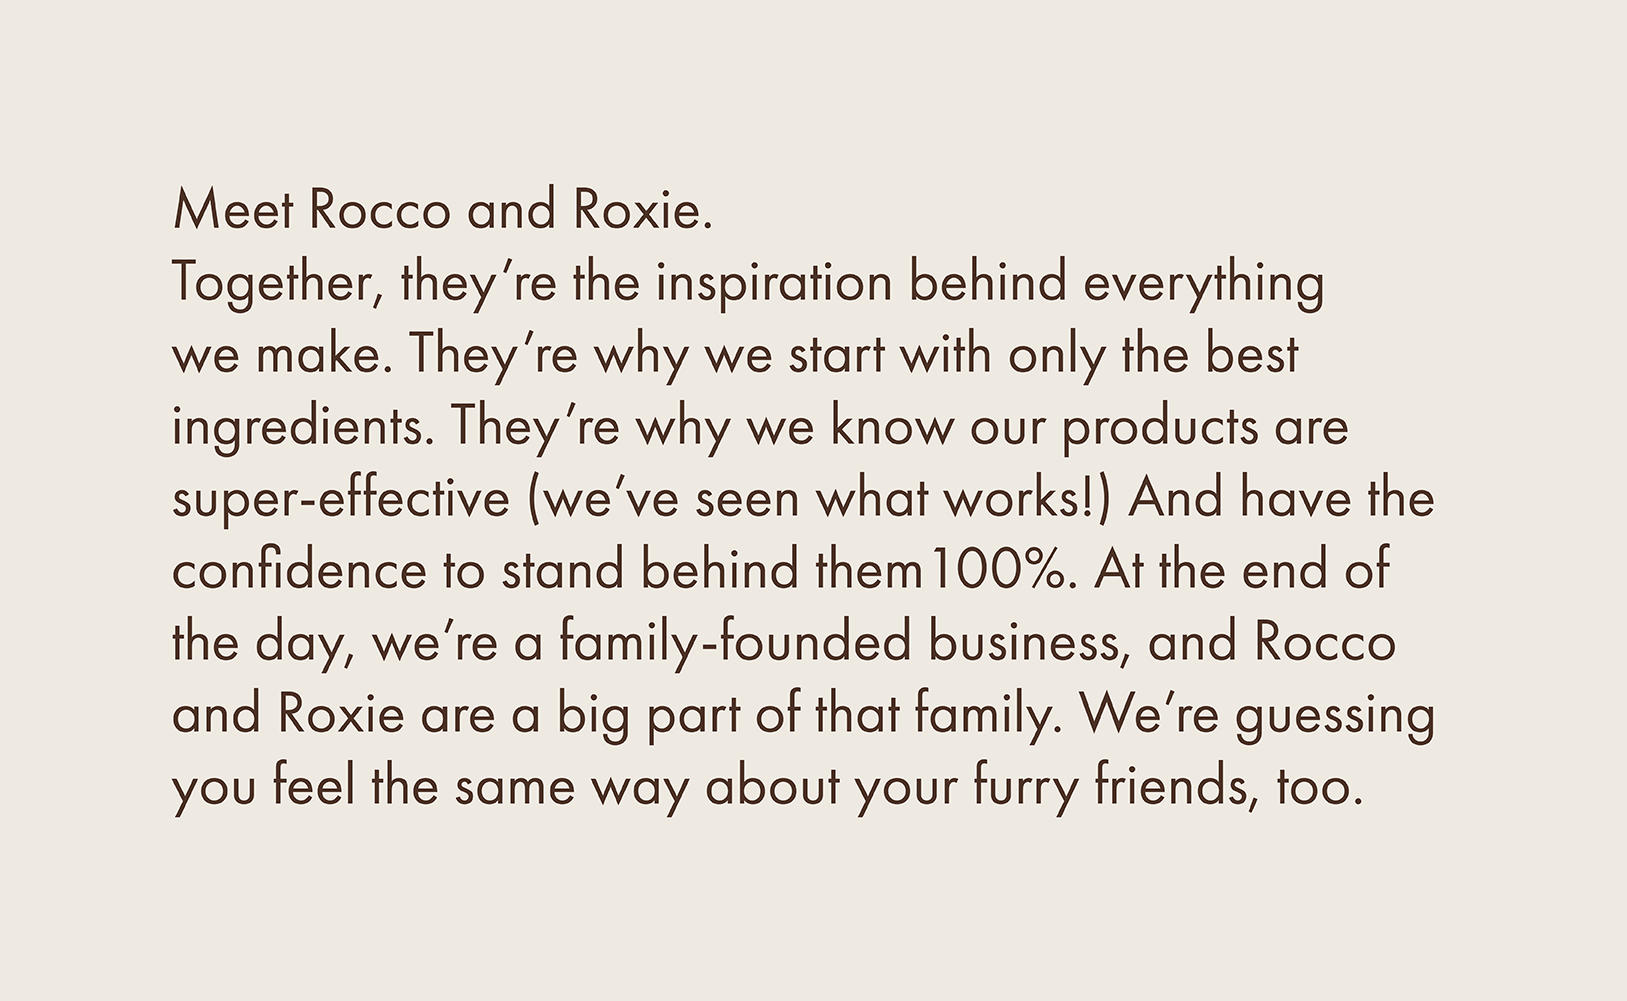 Meet Rocco and Roxie. Together, they're the inspiration behind everything we make. They're why we start with only the best ingredients. They're why we know our products are super-effective we've seen what works!\ And have the confidence to stand behind them 100%. At the end of the day, we're a family-founded business, and Rocco and Roxie are a big part of that family. We're guessing you feel the same way about your furry friends, too.